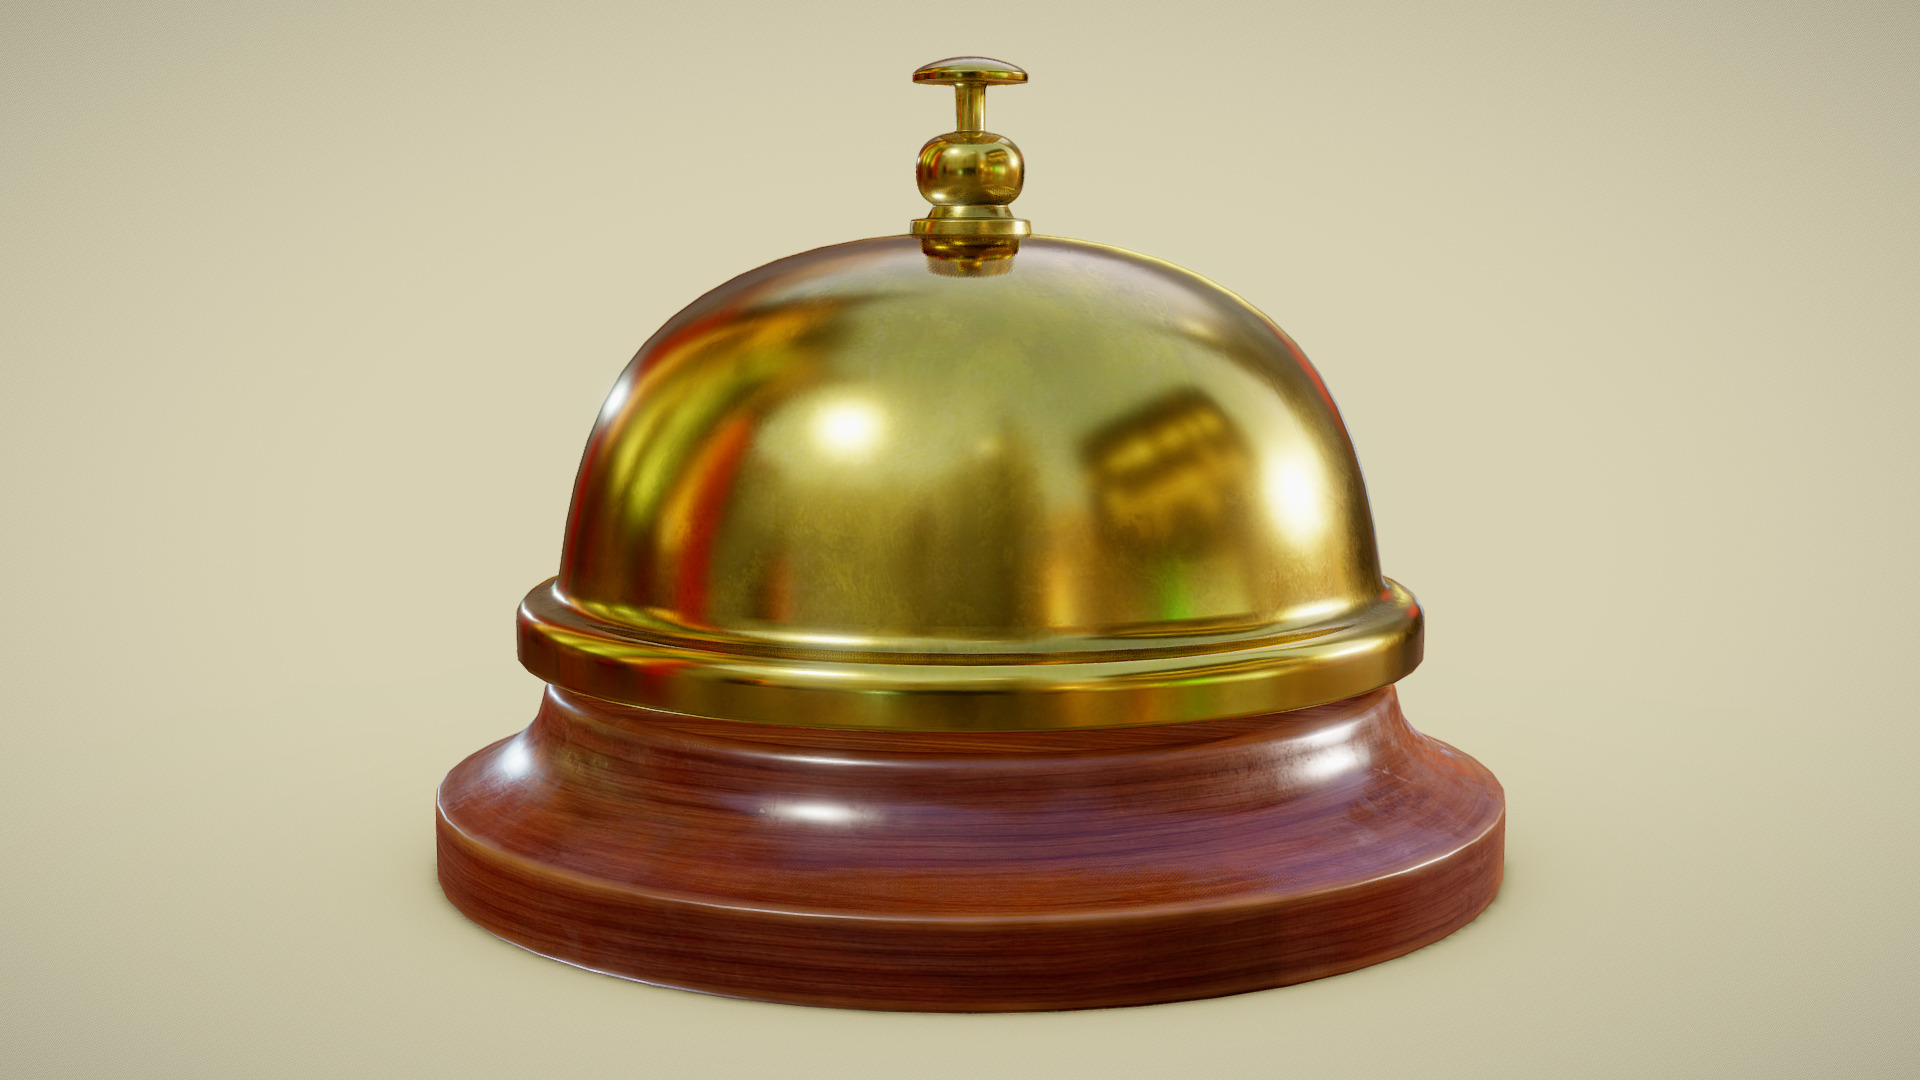 3D model Reception Bell - This is a 3D model of the Reception Bell. The 3D model is about a gold bell on a wooden surface.